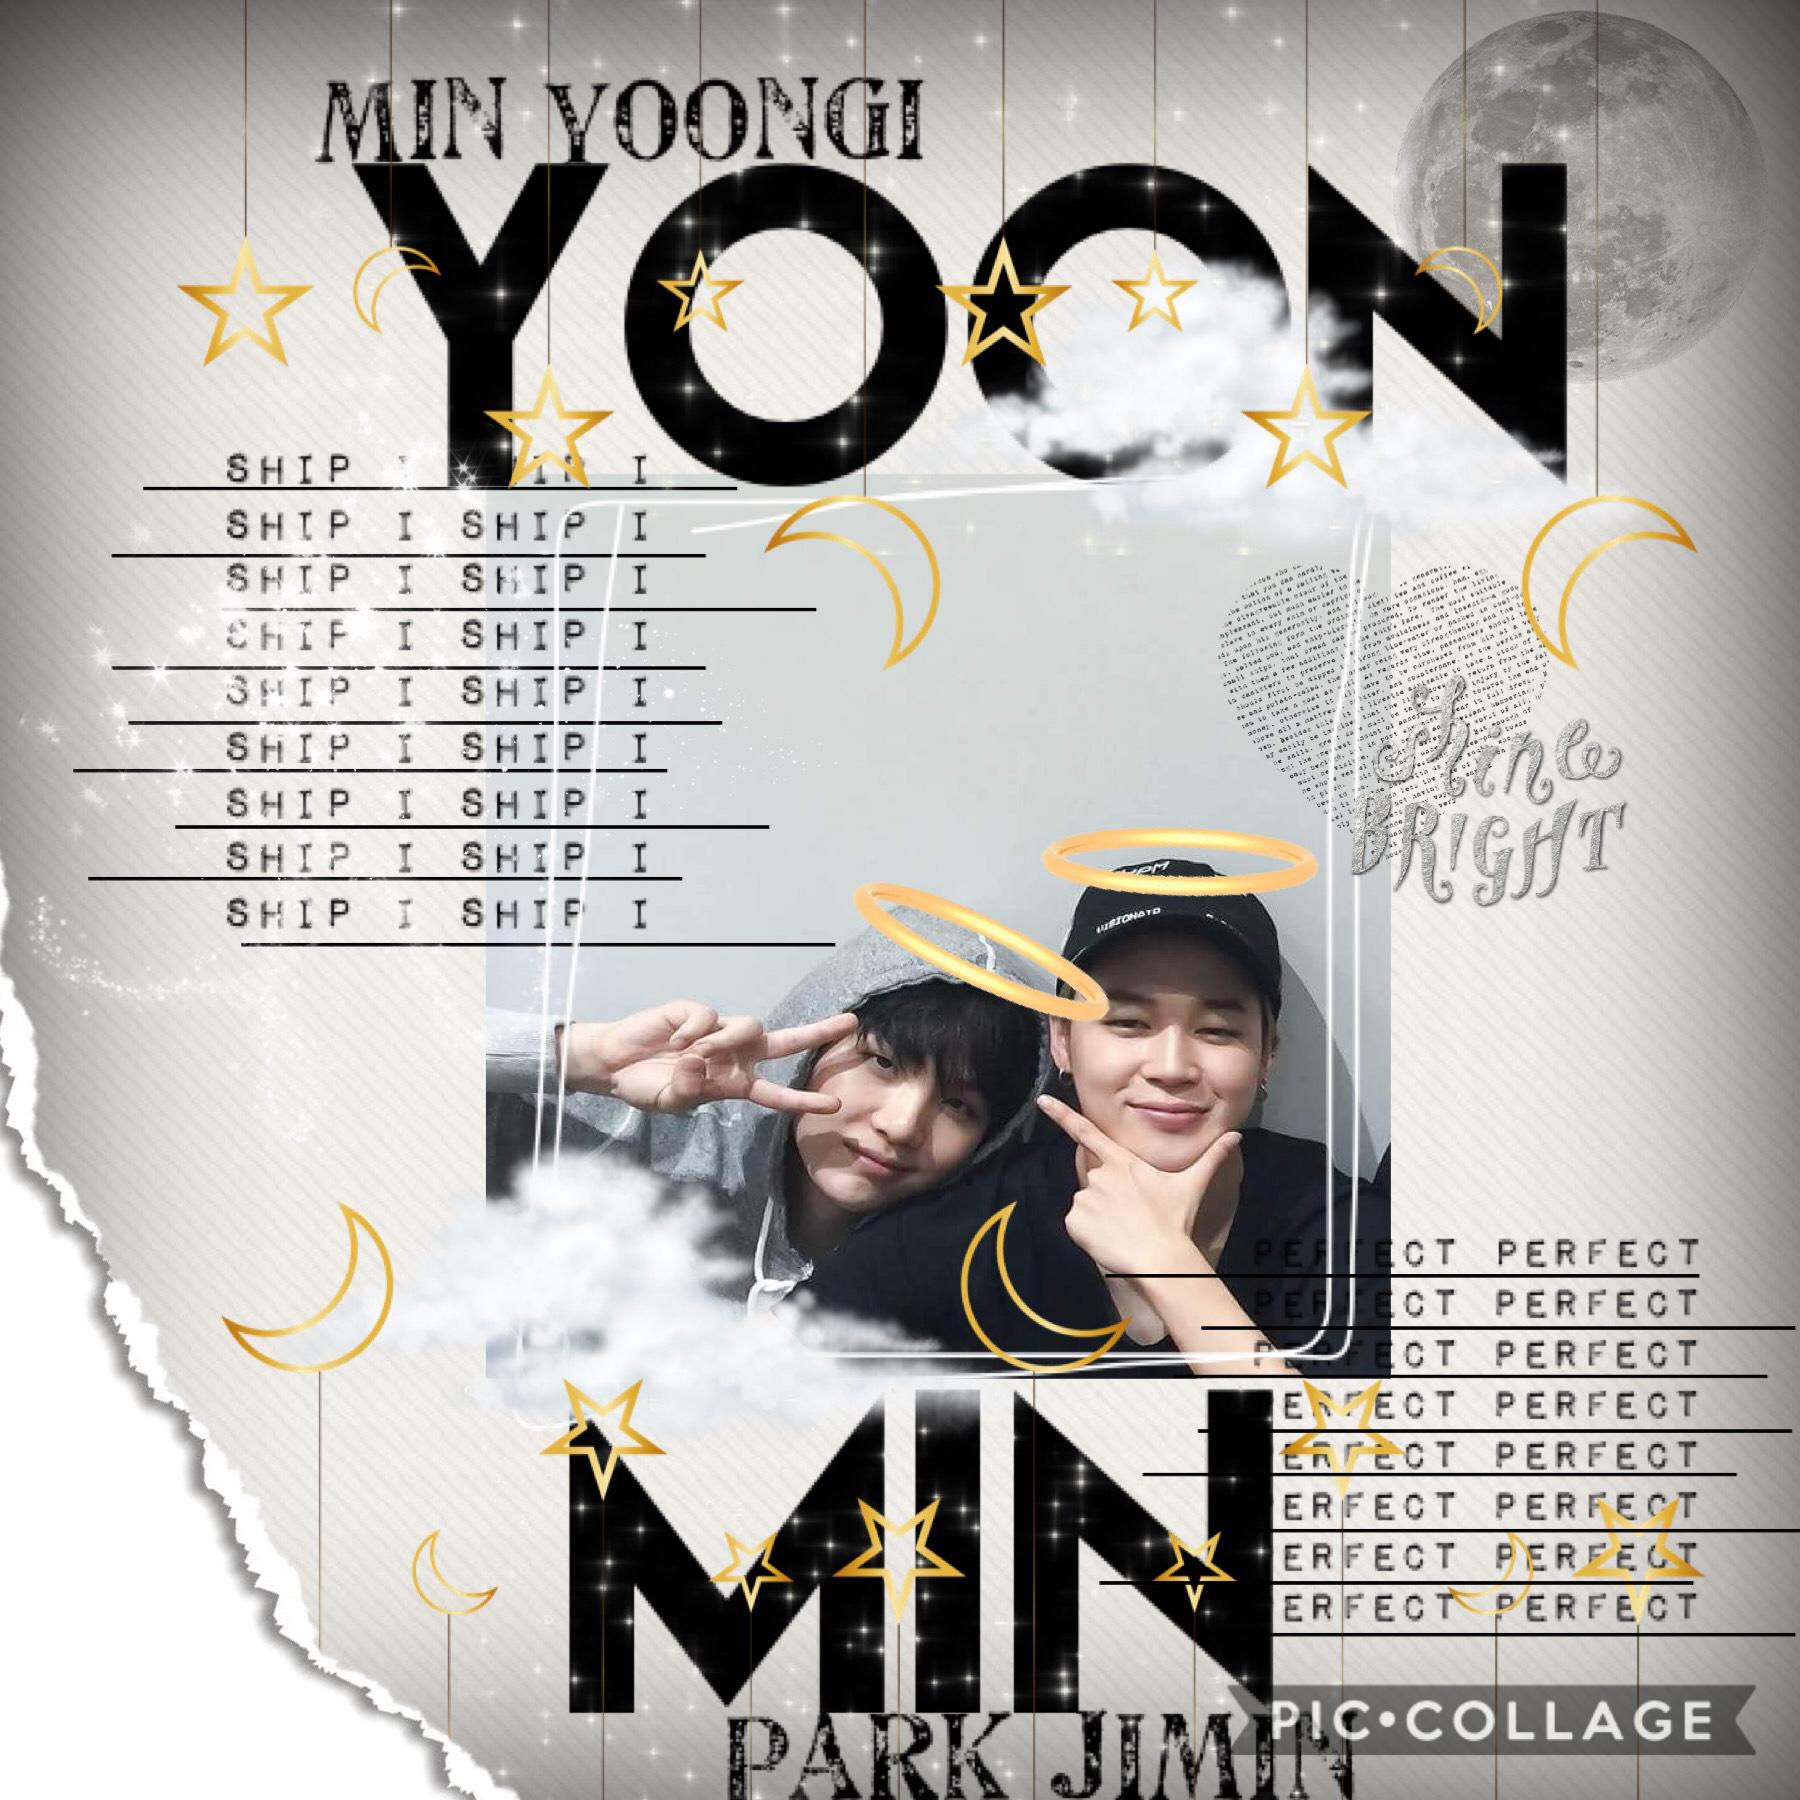 👻 tap 👻
First of all, I’m going to change my name, but what to? Gimme some ideas! 💡 
Second, Yoomin is such a cute ship! 🖤🤍